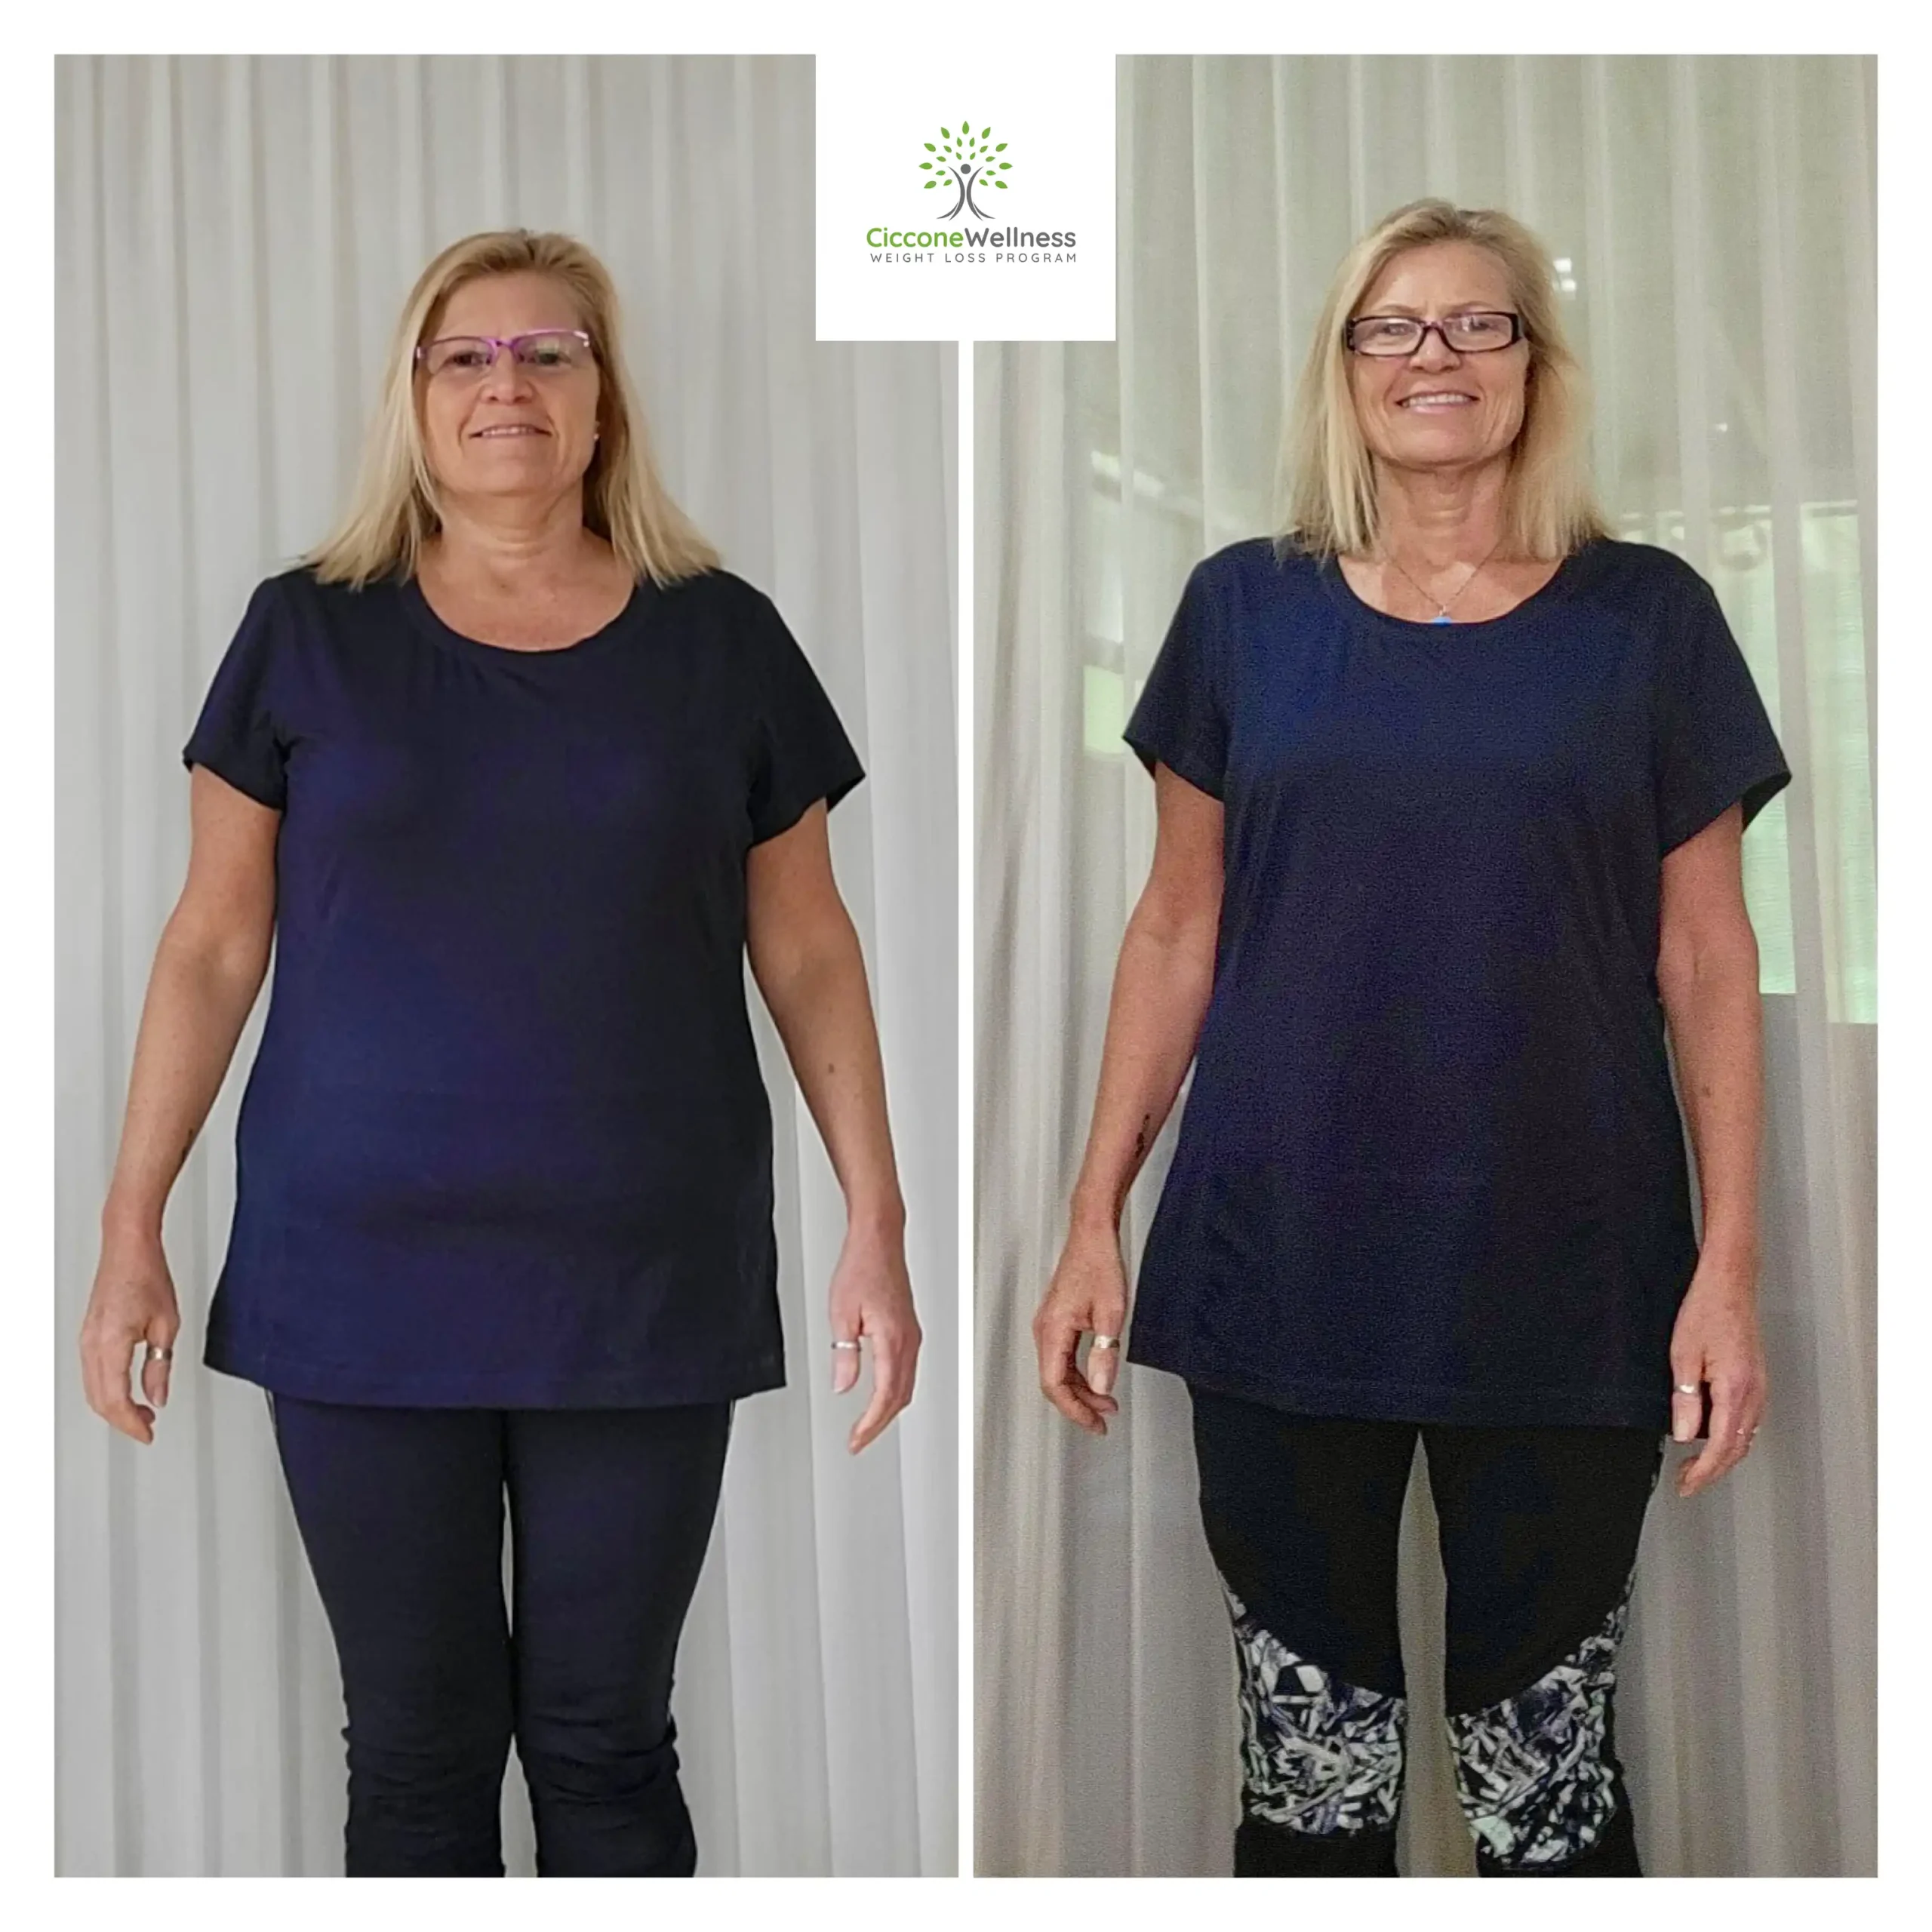 Transformed: Jerilyn’s 90-Day Journey to Weight Loss and Wellness